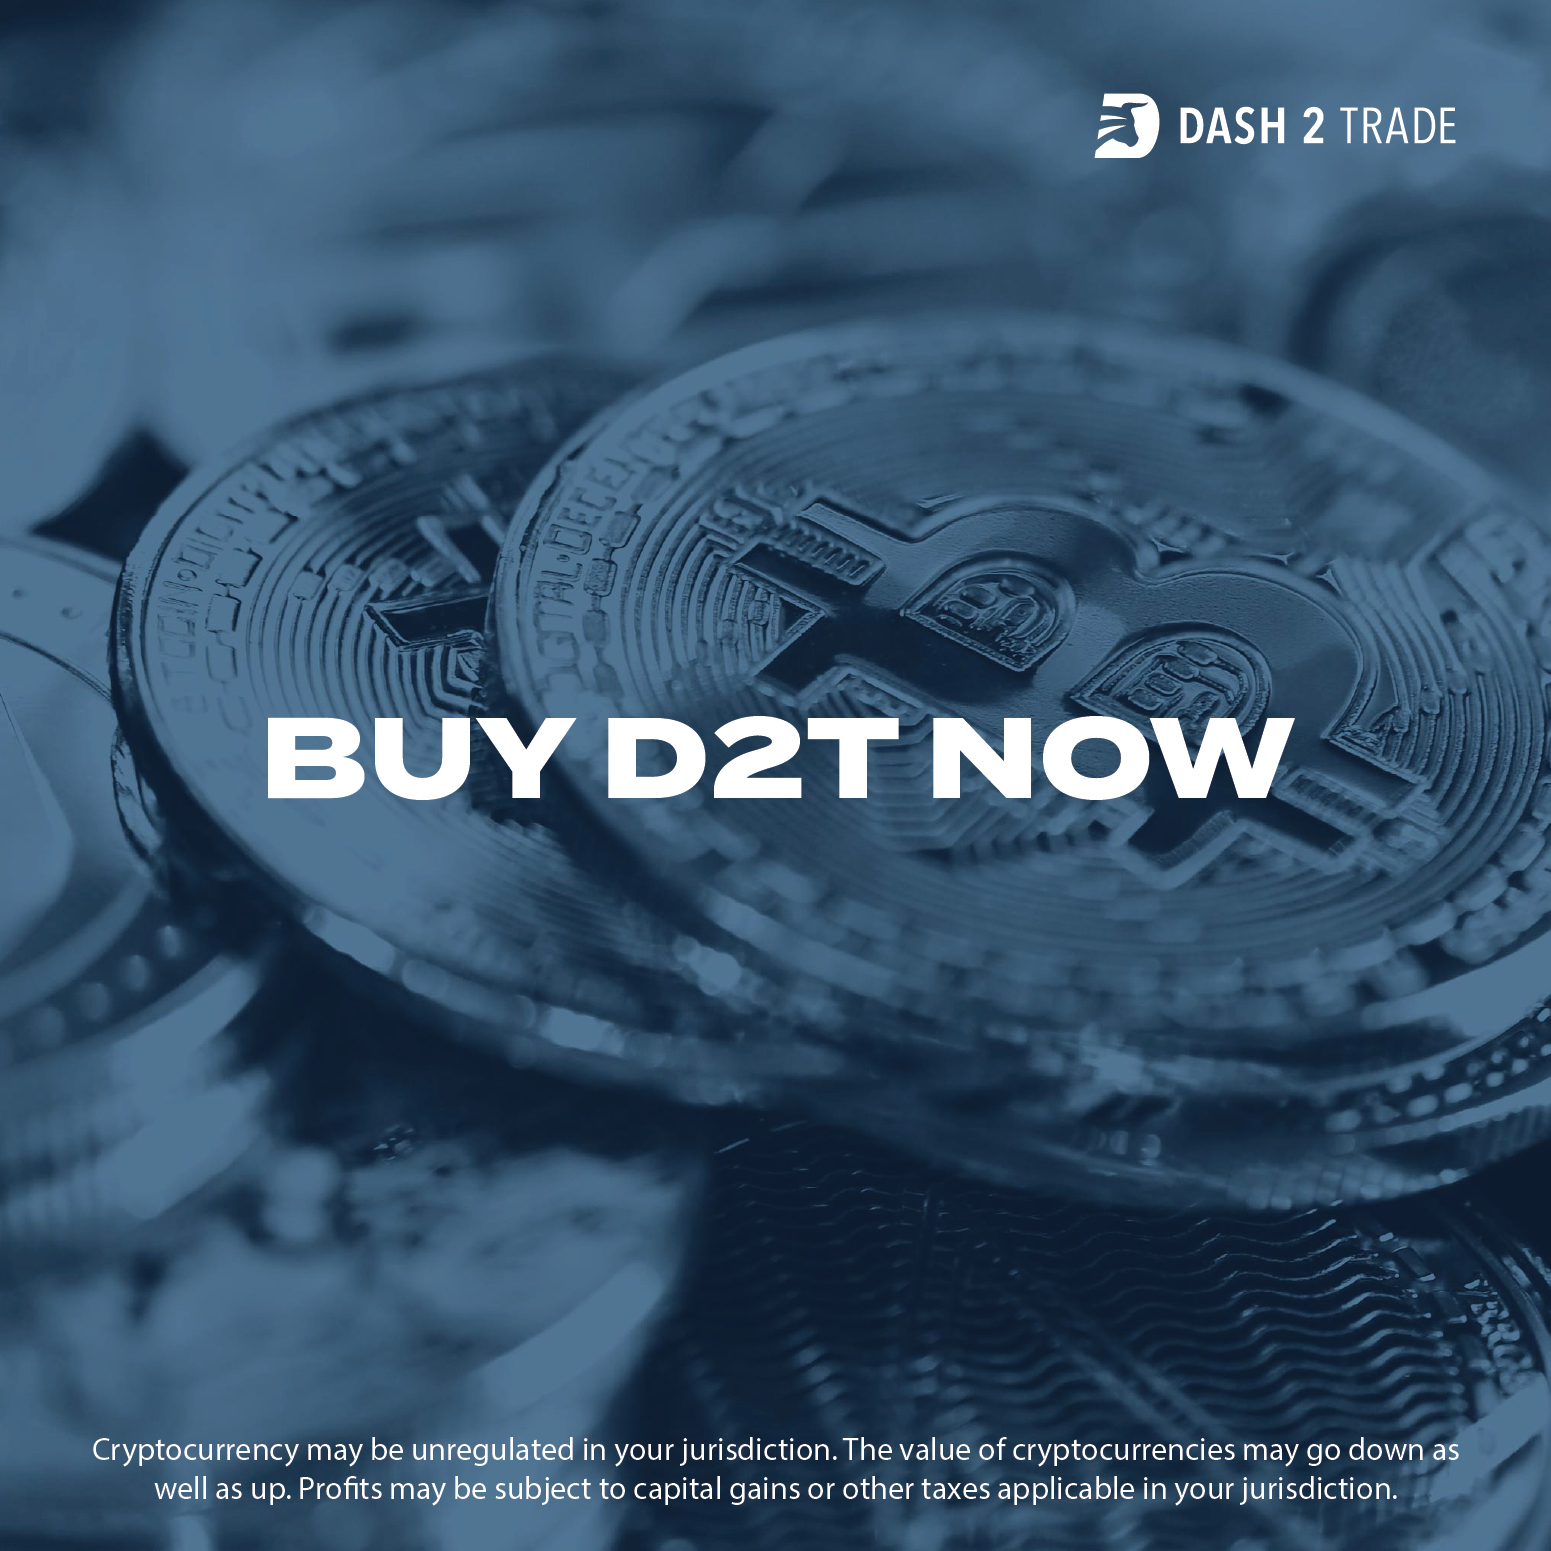 Dash 2 Trade ICO Raises $7 Million, Prepares For Early Launch With 2 CEX Listings Confirmed